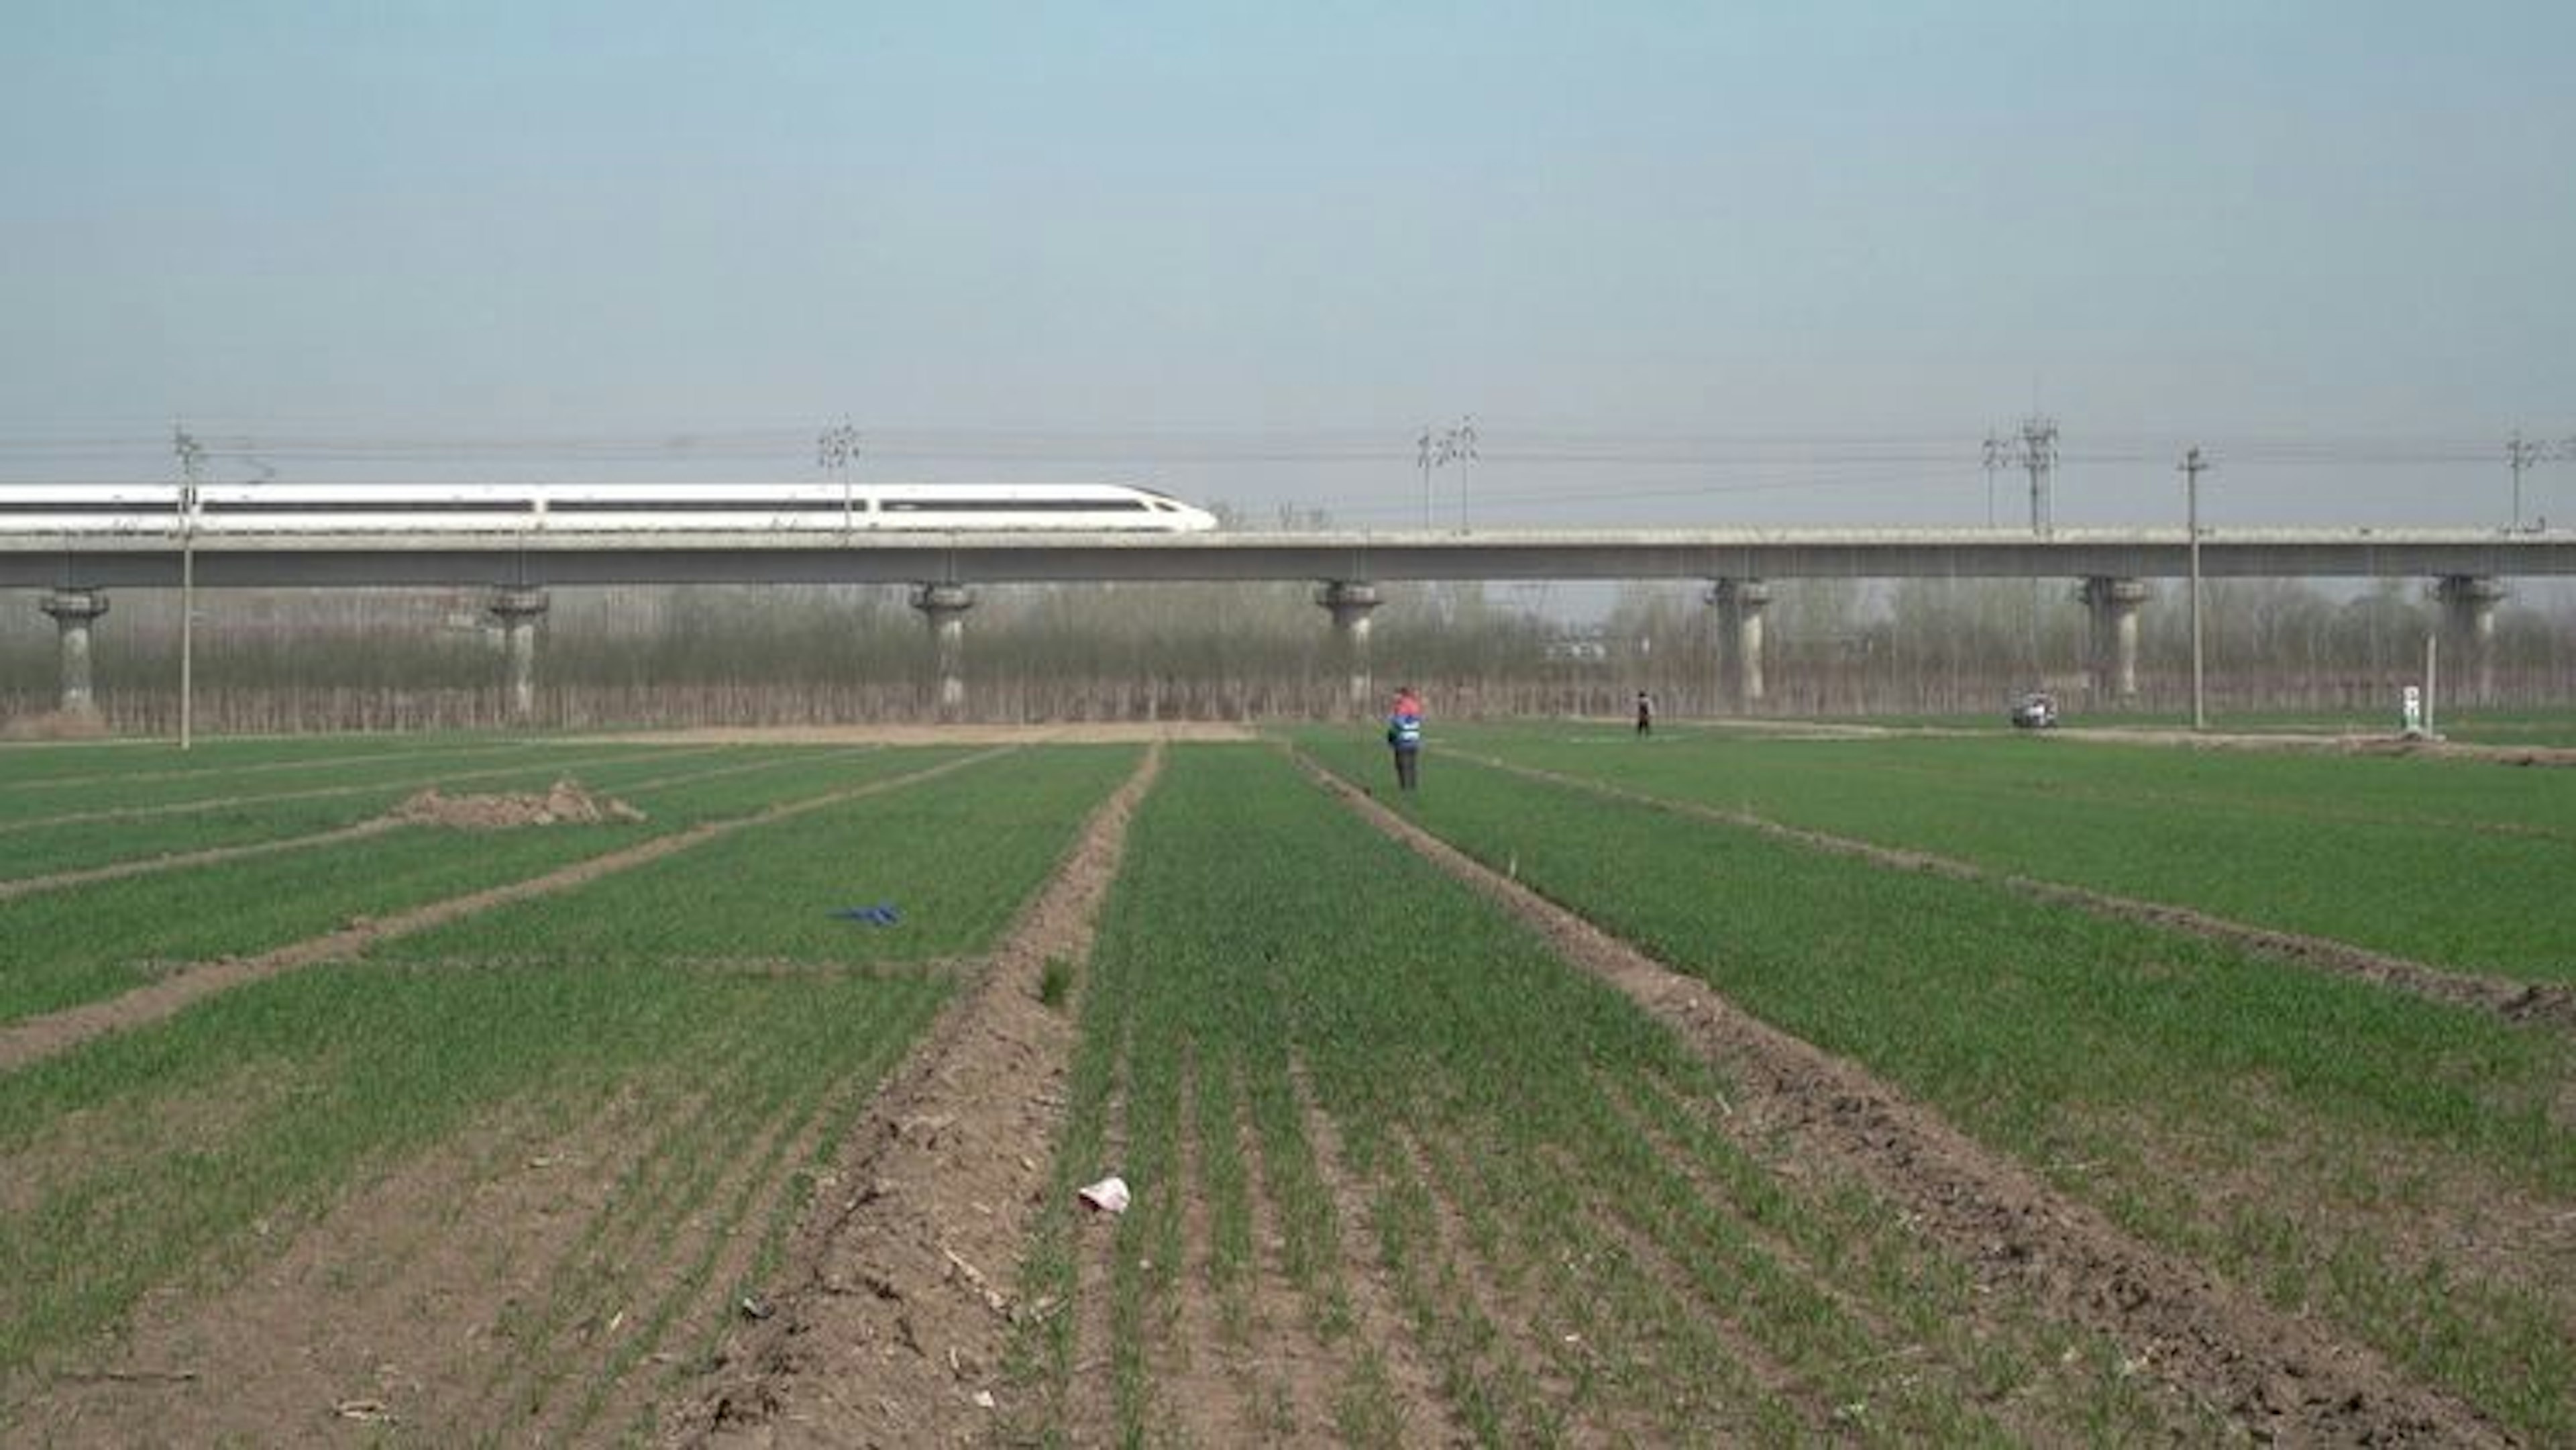 A large green field with two people standing in the foreground, their backs facing the viewer. A white train passes in the background. 